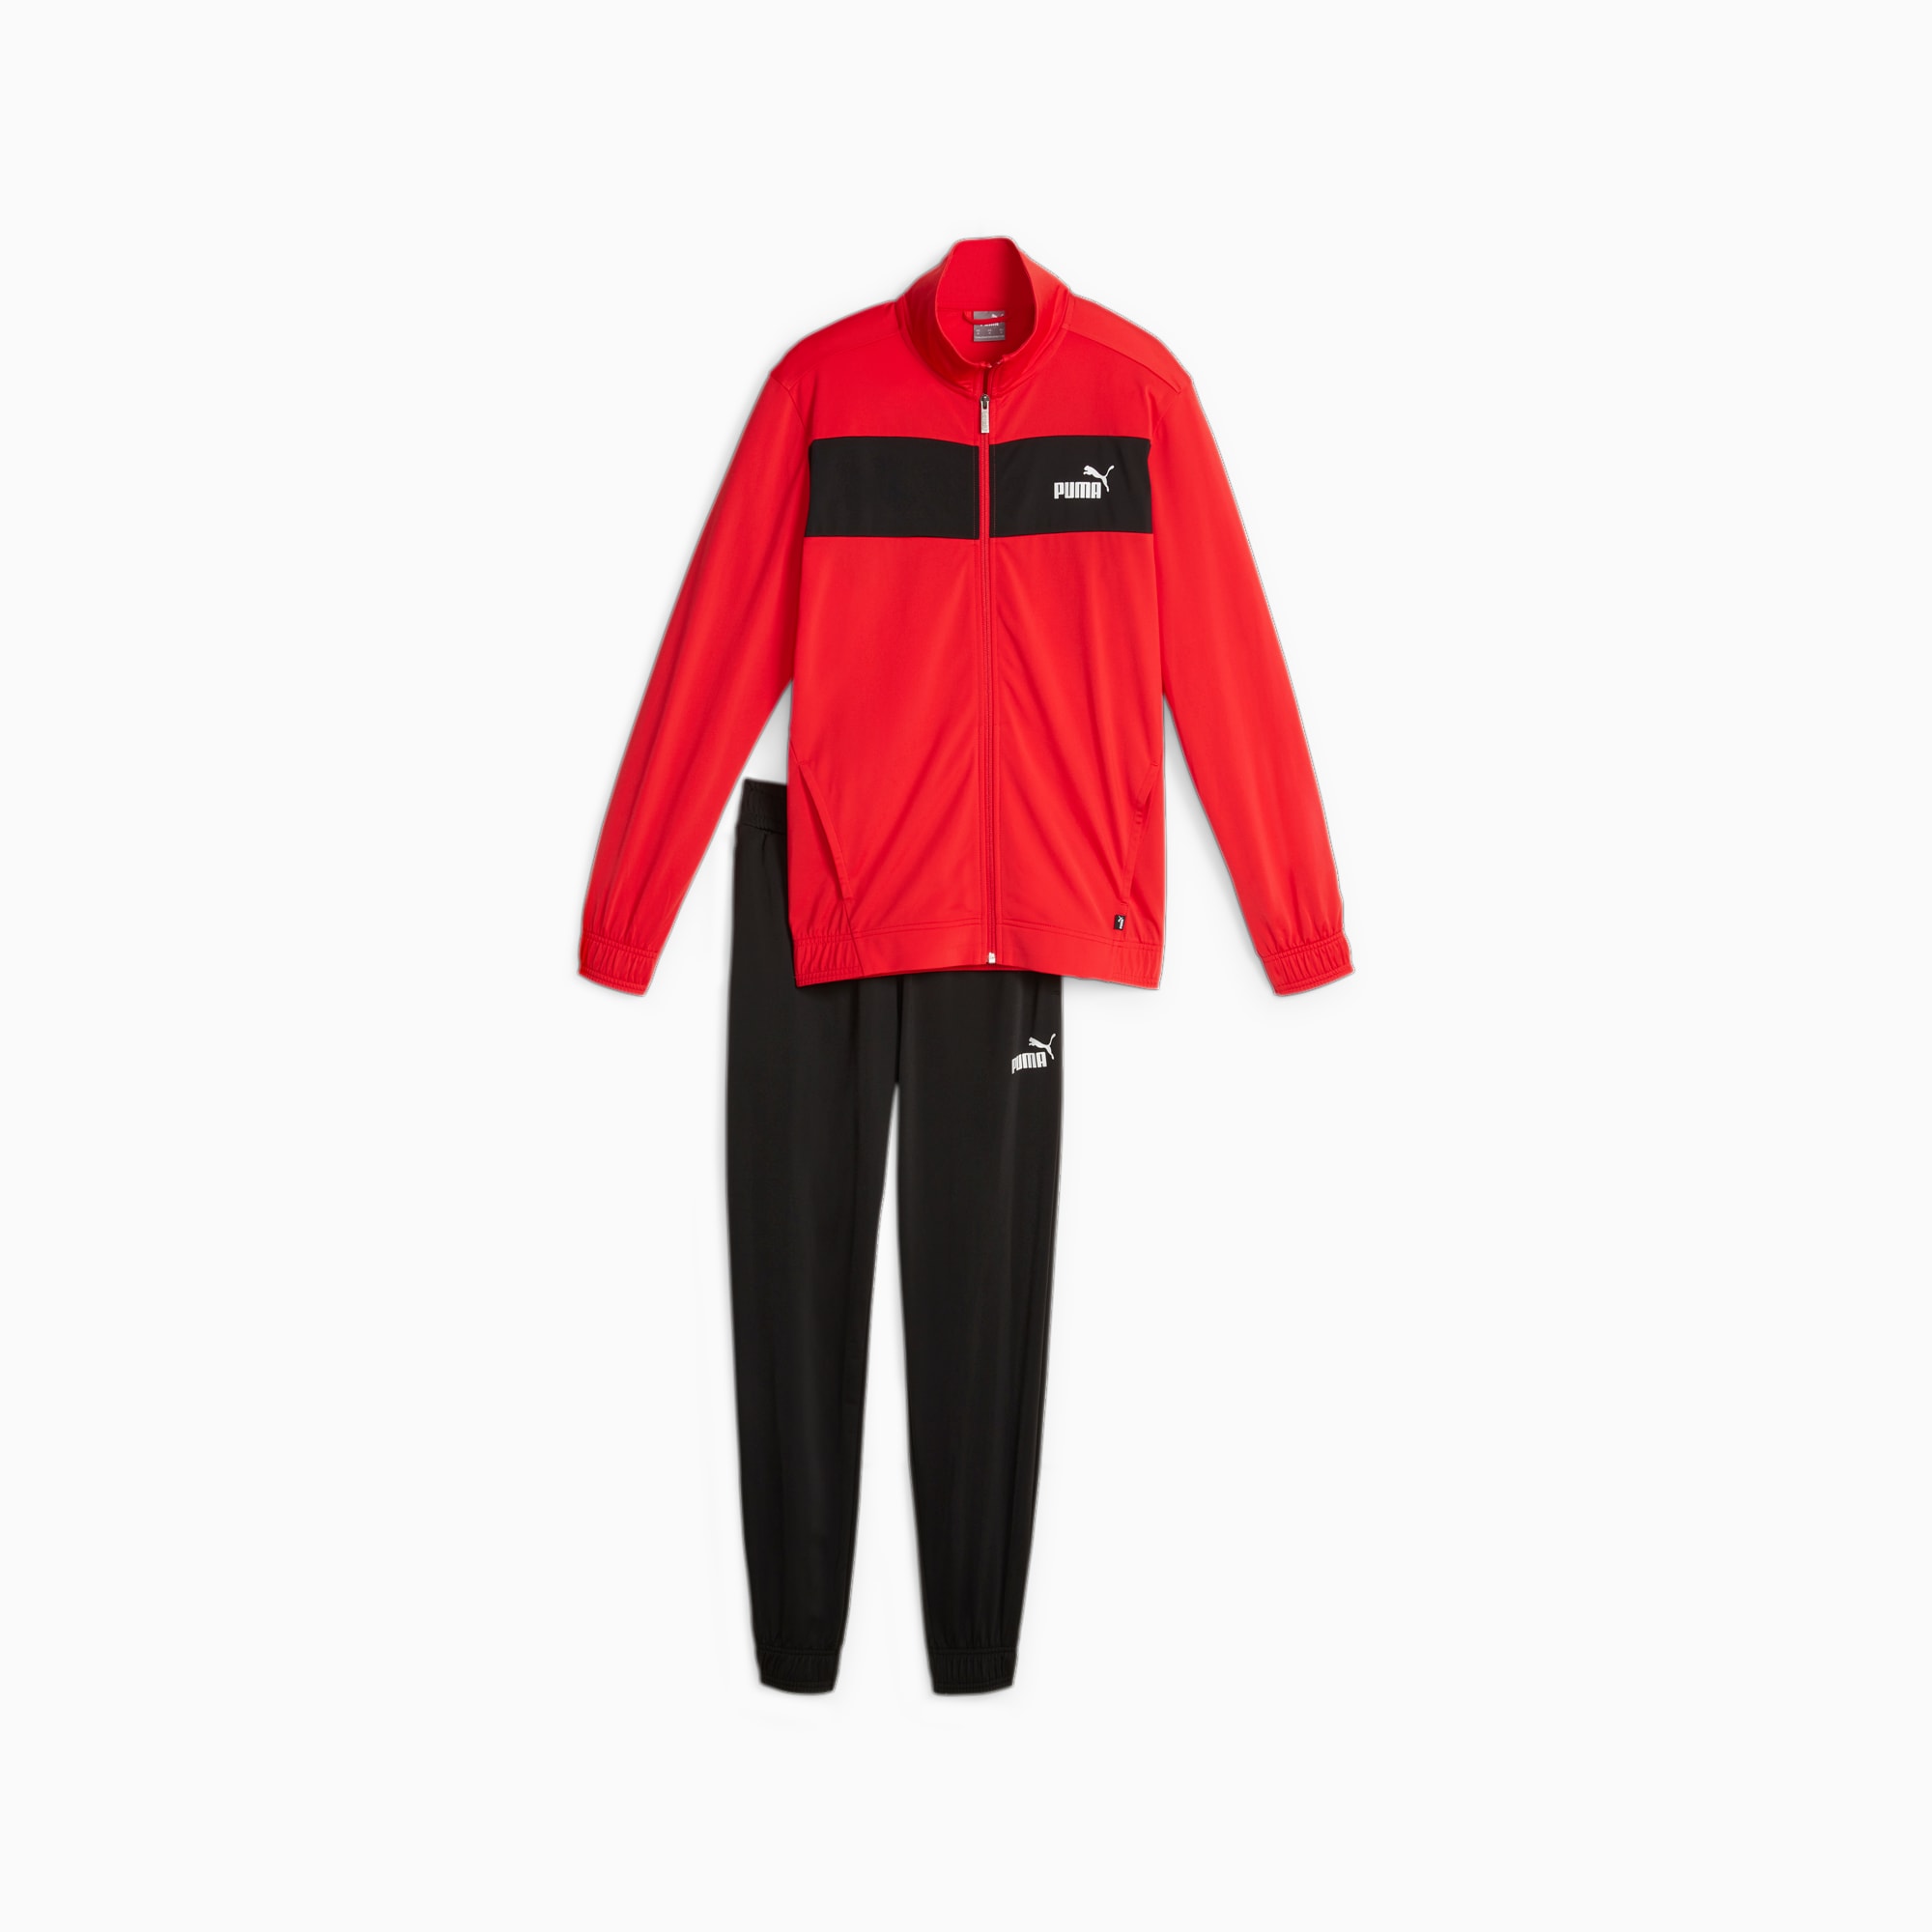 PUMA Men's Poly Tracksuit, For All Time Red, Size XL, Clothing